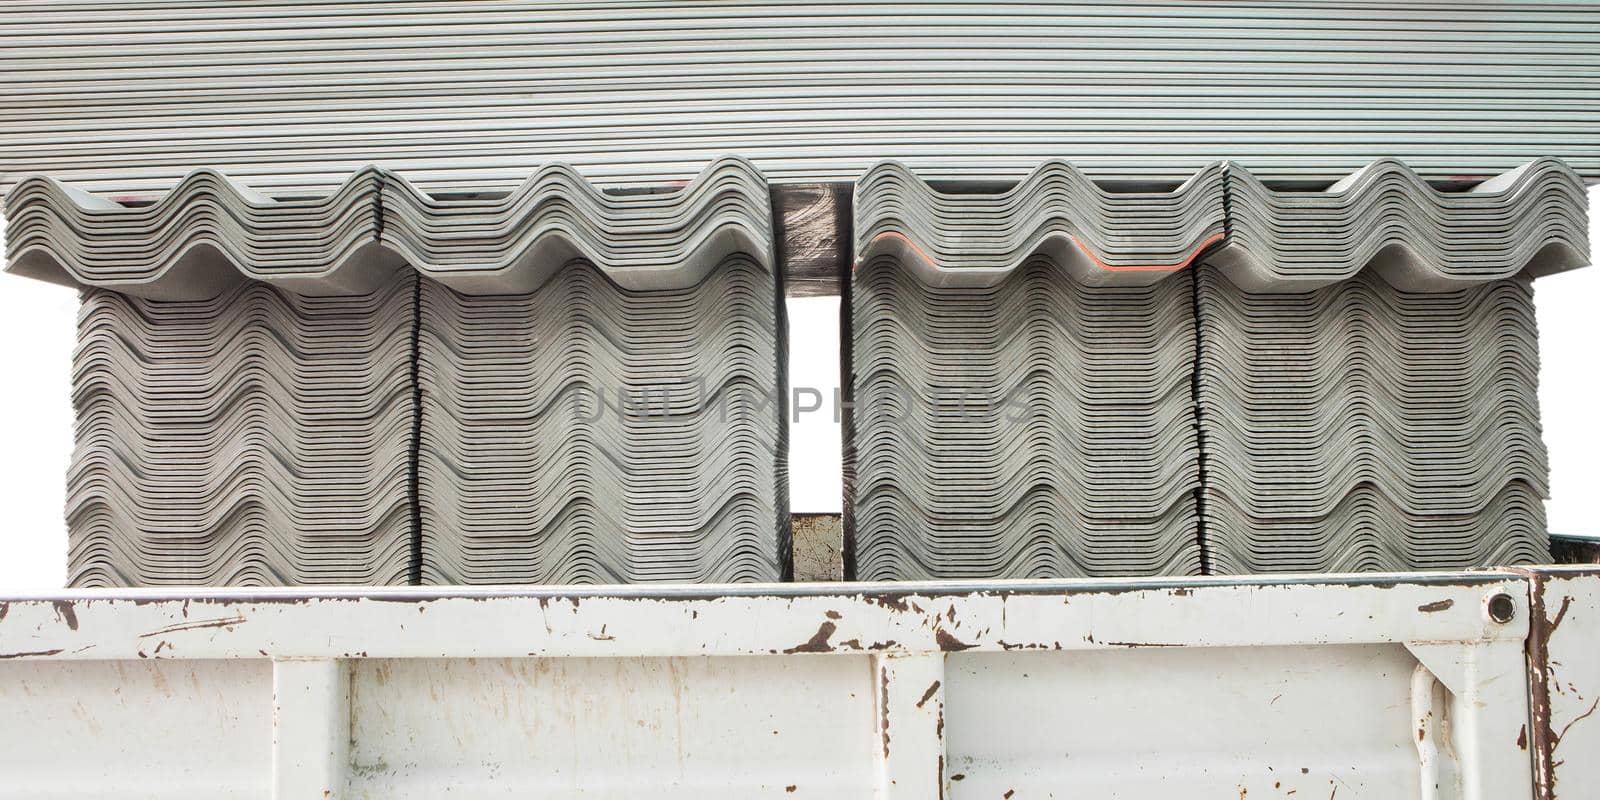 Roof Tiles in Material Store by titipong